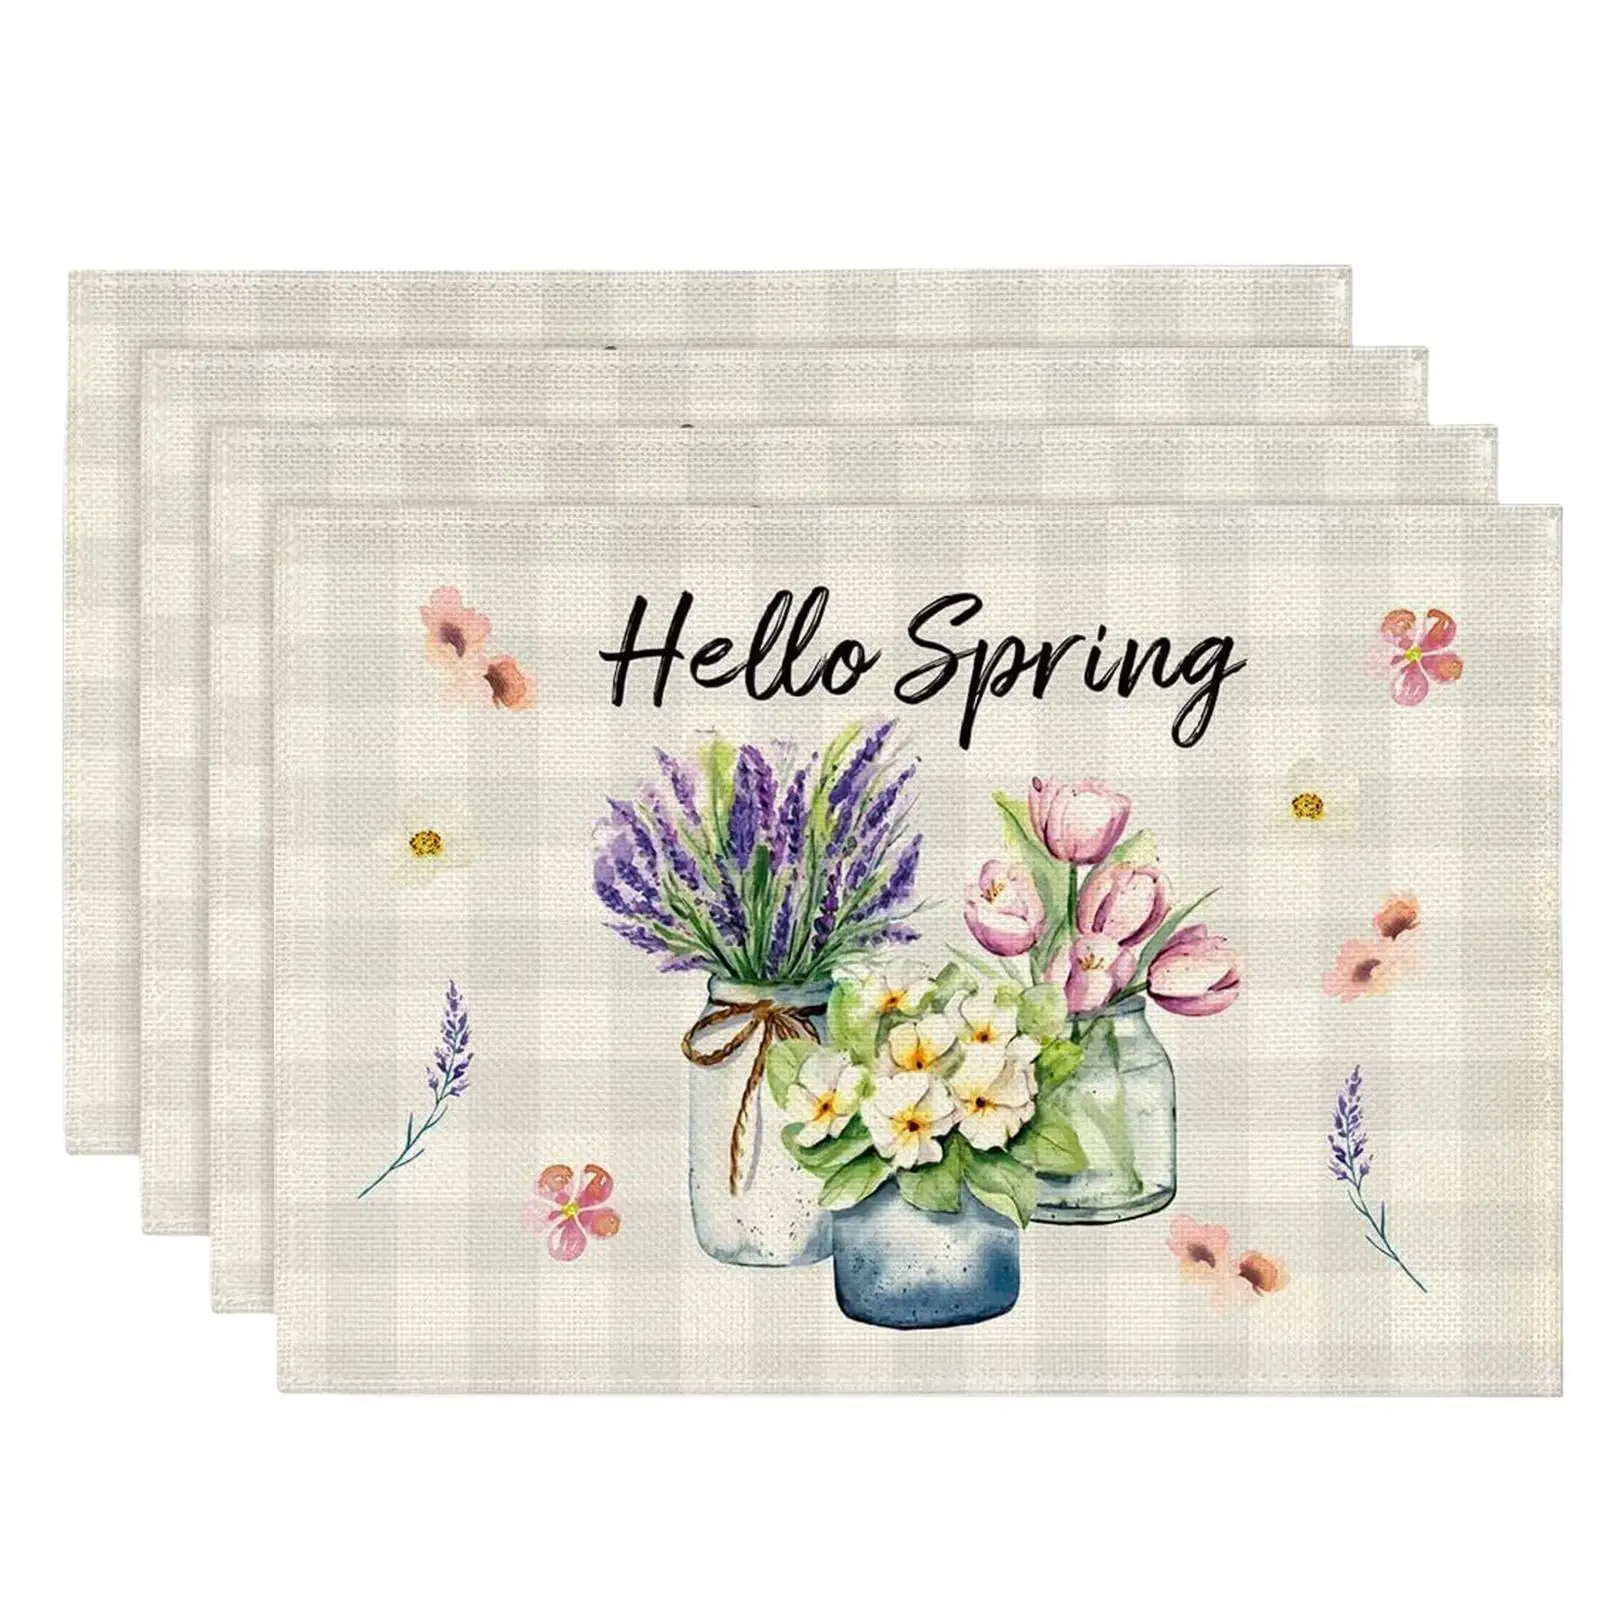 Table Runner Party Favor Floral Pattern Portable Linen Easter Decorations for Celebration Kitchen Holiday Event Gathering